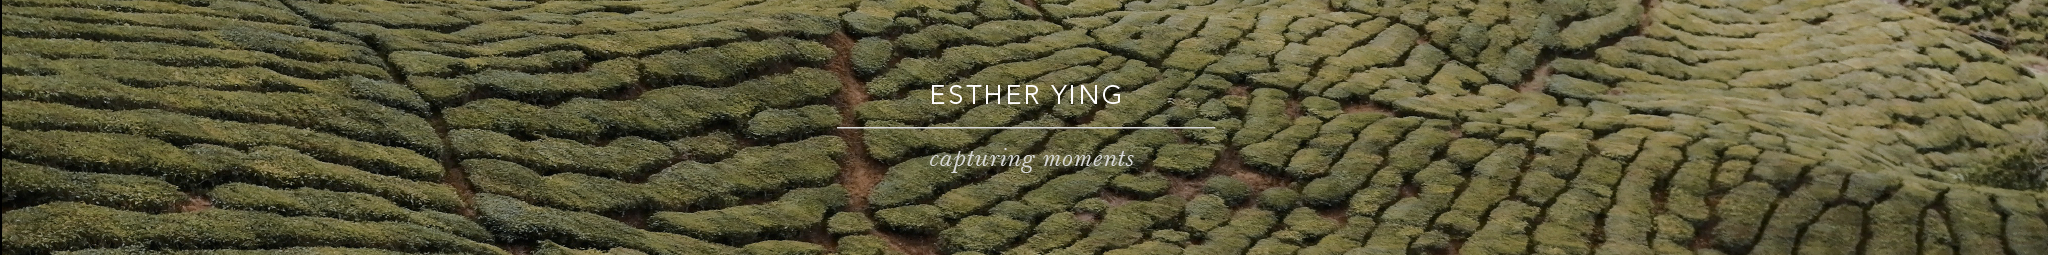 Esther Ying's profile banner